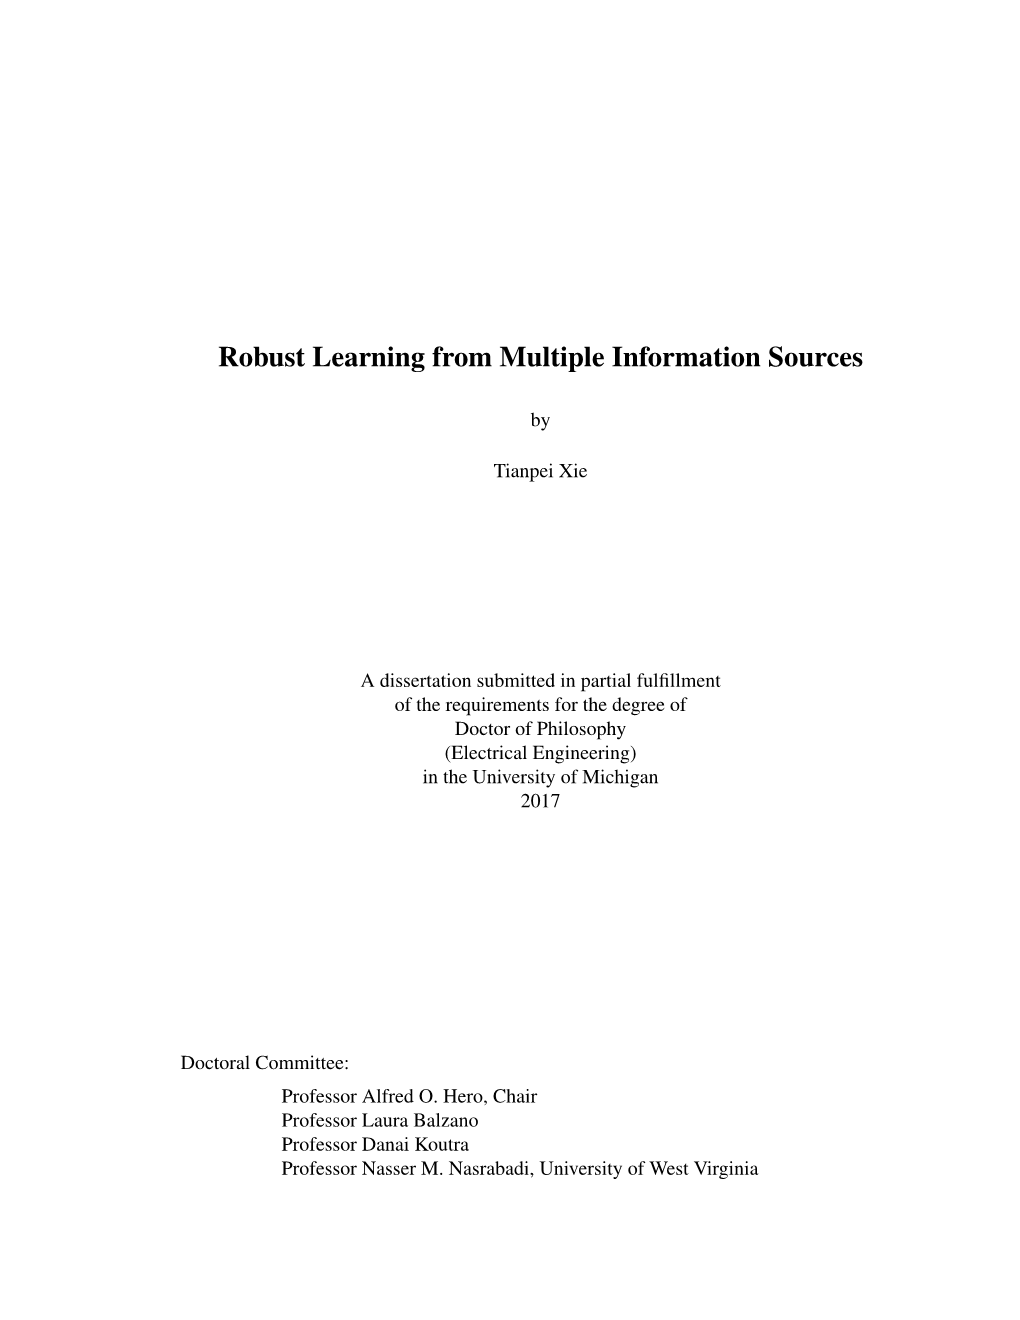 1.2In Robust Learning from Multiple Information Sources